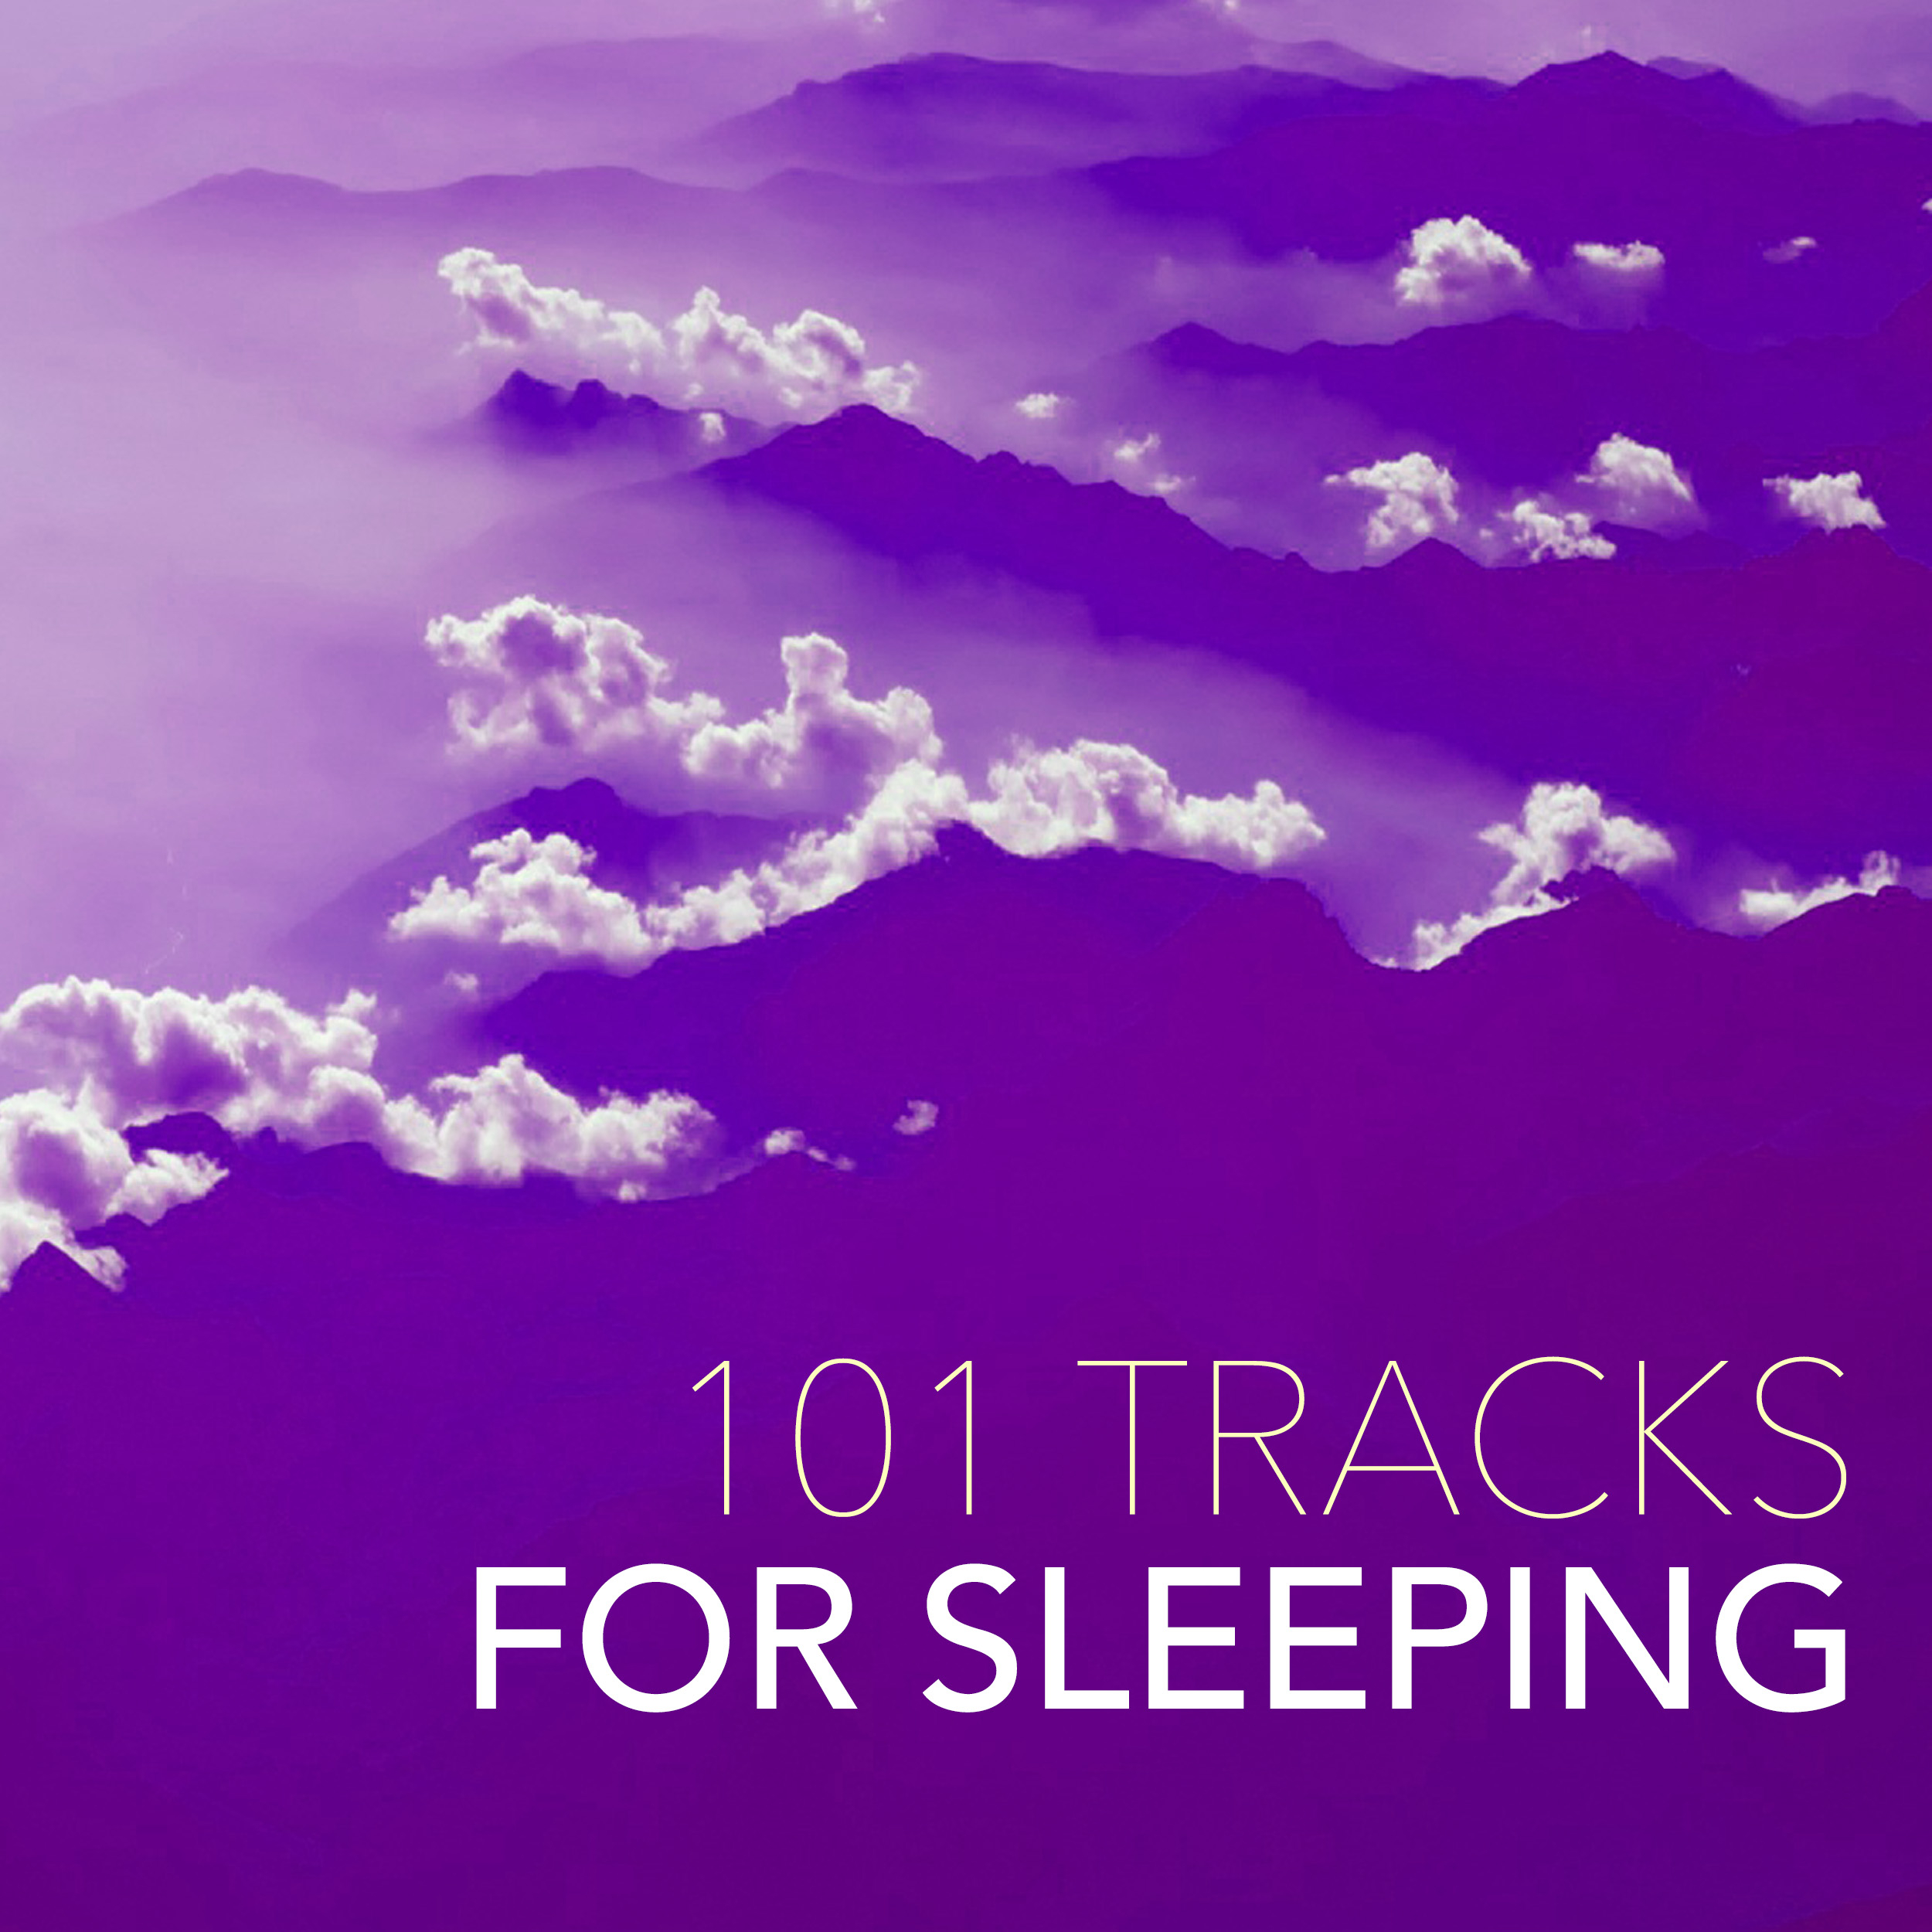 101 Tracks for Sleeping - Bedtime Music, Cozy Pillow Songs for Relaxation Study Meditation